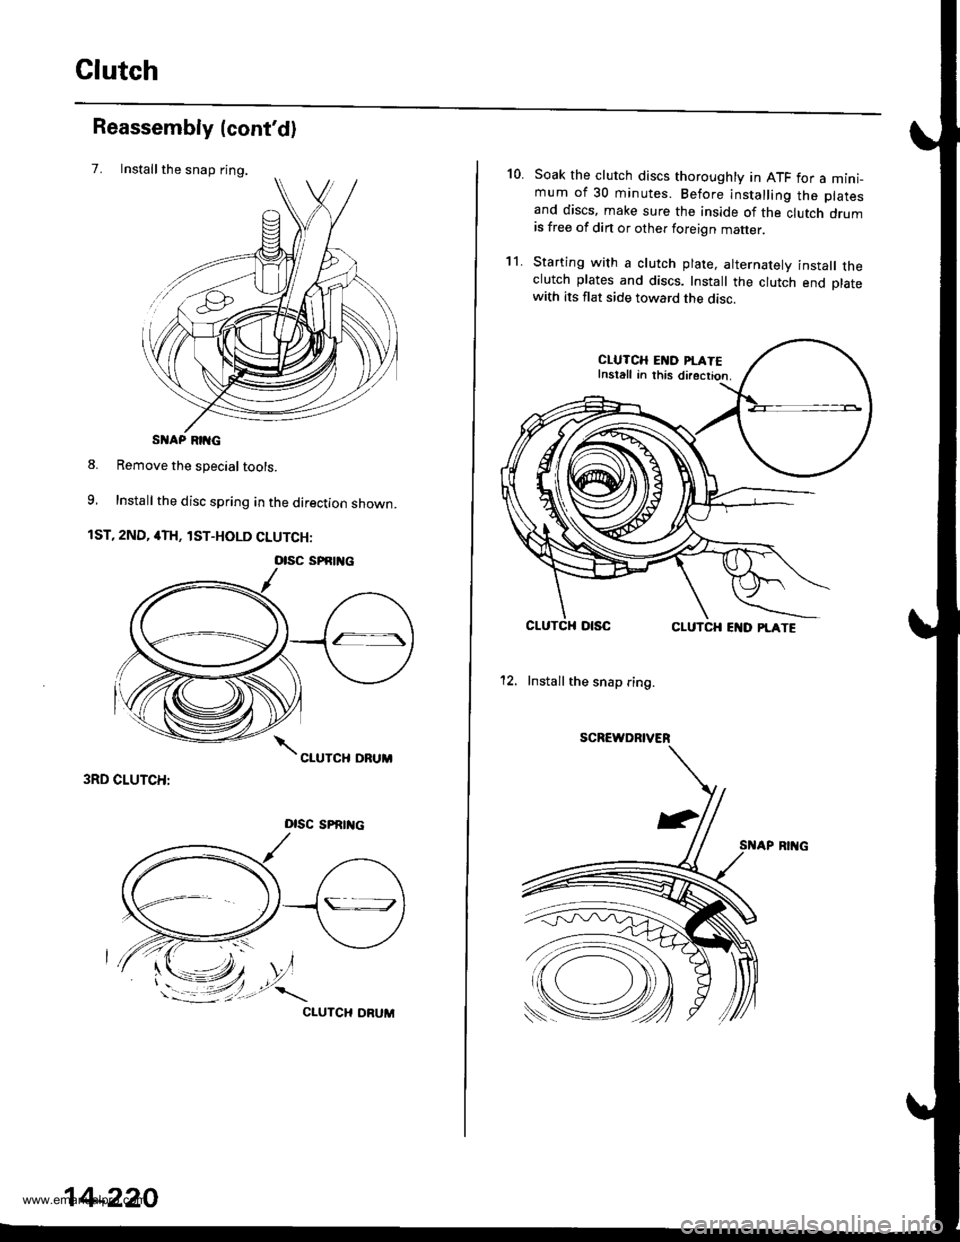 HONDA CR-V 1999 RD1-RD3 / 1.G Workshop Manual 
Clutch
Installthe snap ring.
Reassembly (contd)
7.
S AP RIIG
8. Remove the special tools.
9, Install the disc spring in the direction shown.
1ST, 2ND, 4TH, lST-HOLD CLUTCH:
3RD CLUTCH:
Dlsc sPRrrtc
